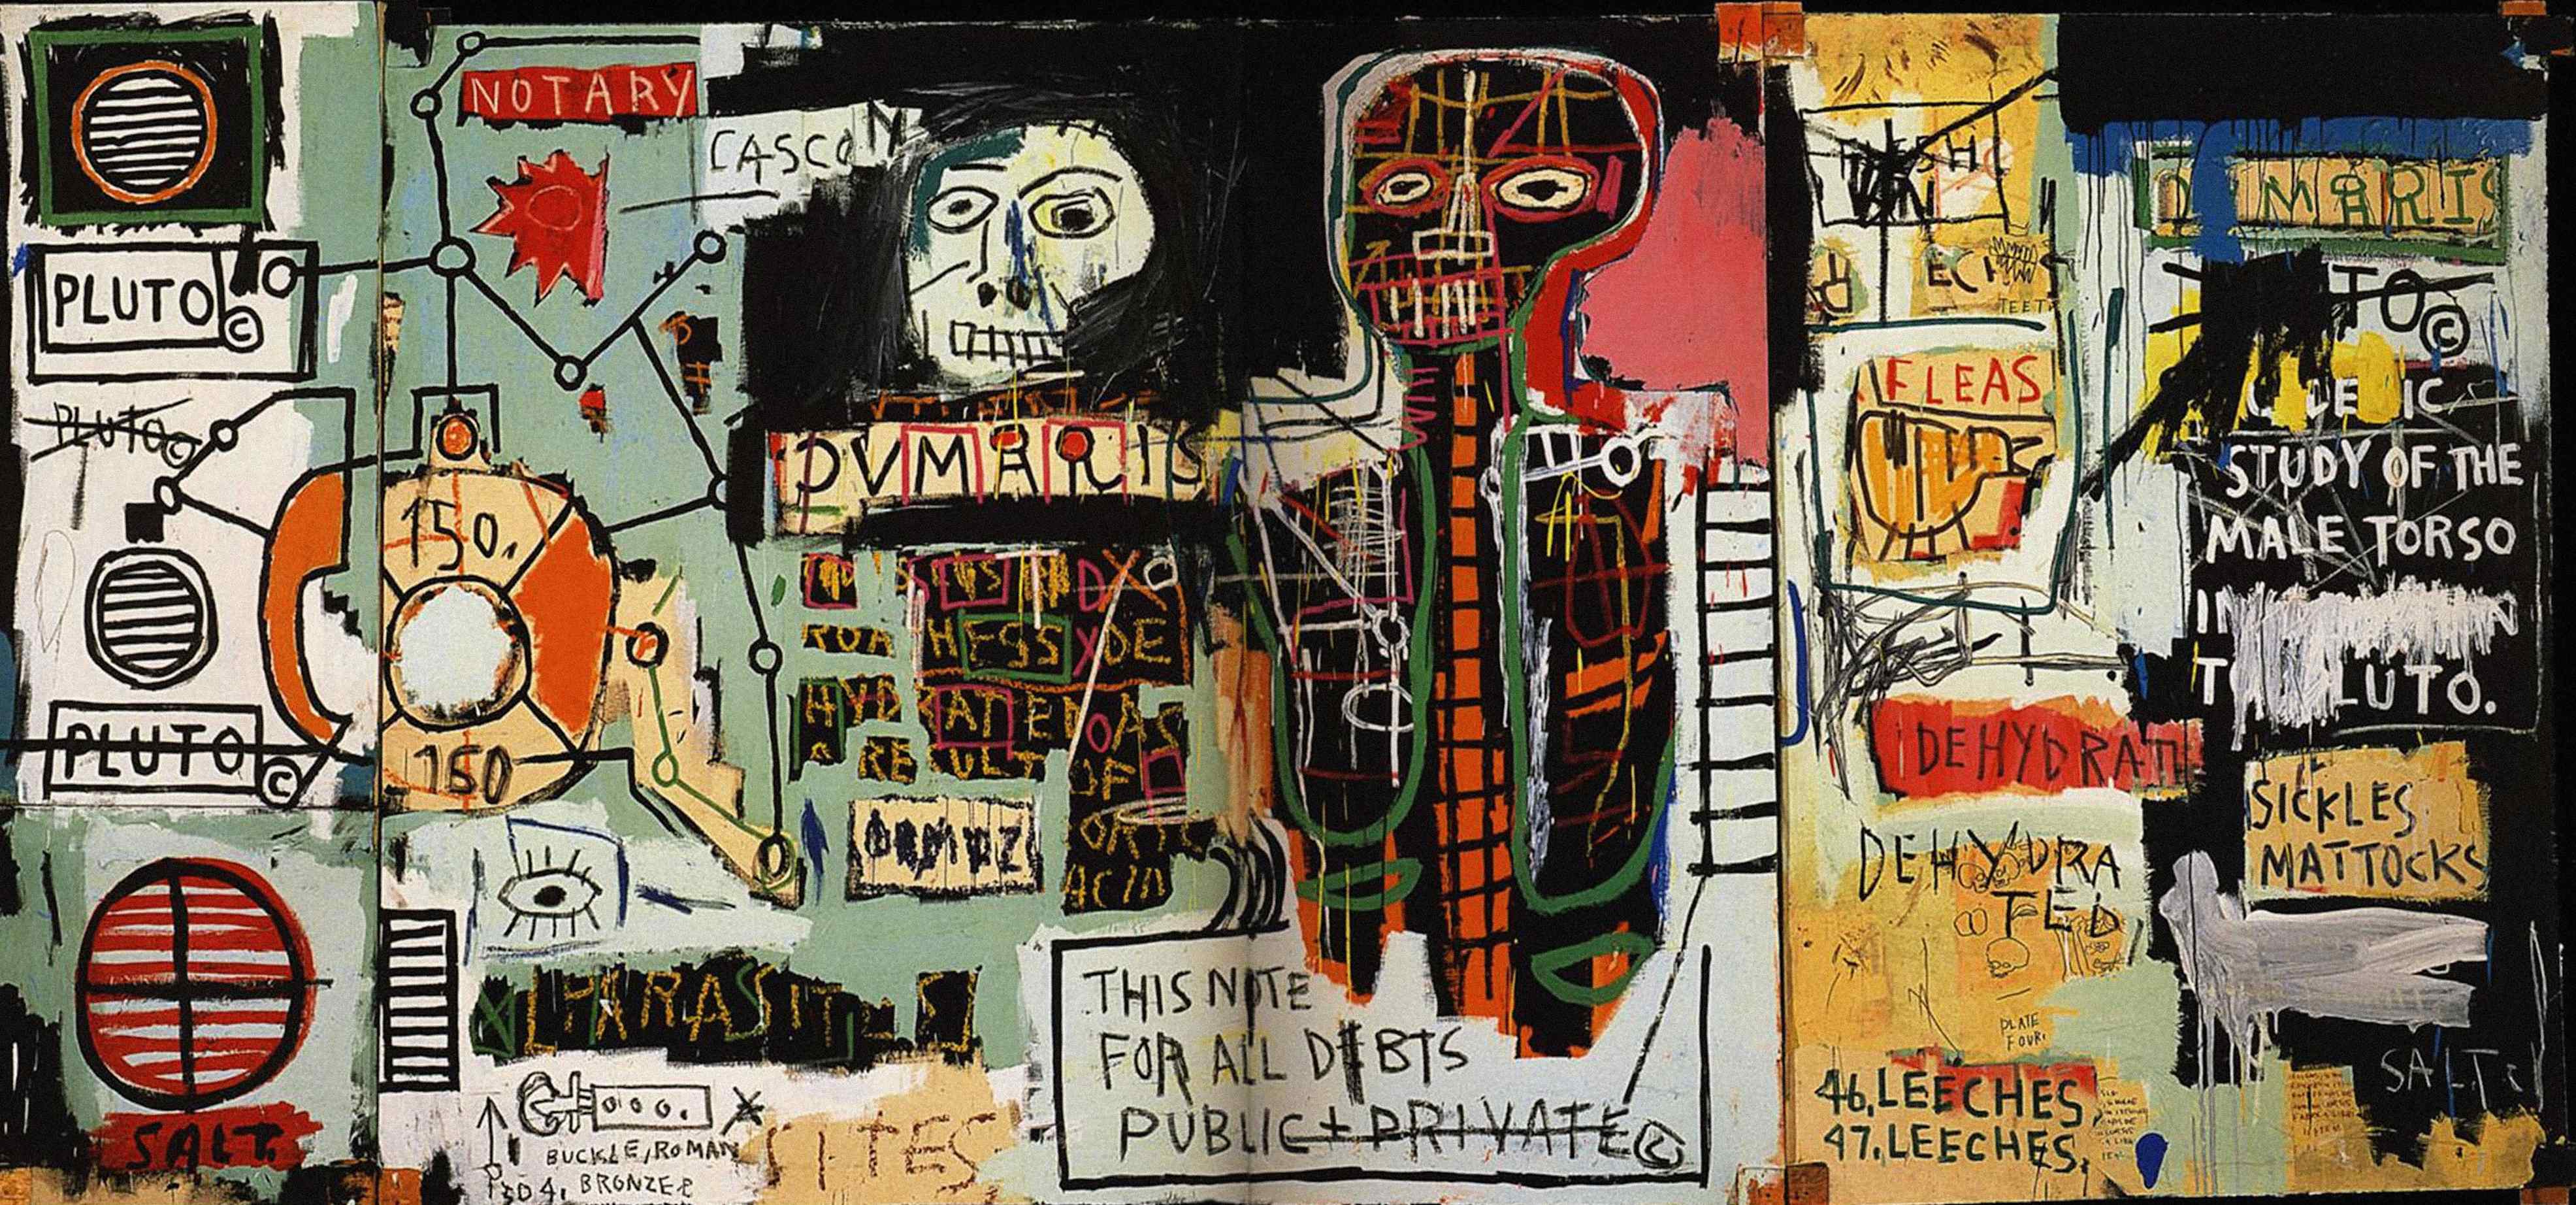 Bloomsbury Philosophy Library - Jean-Michel Basquiat, Notary (1983)